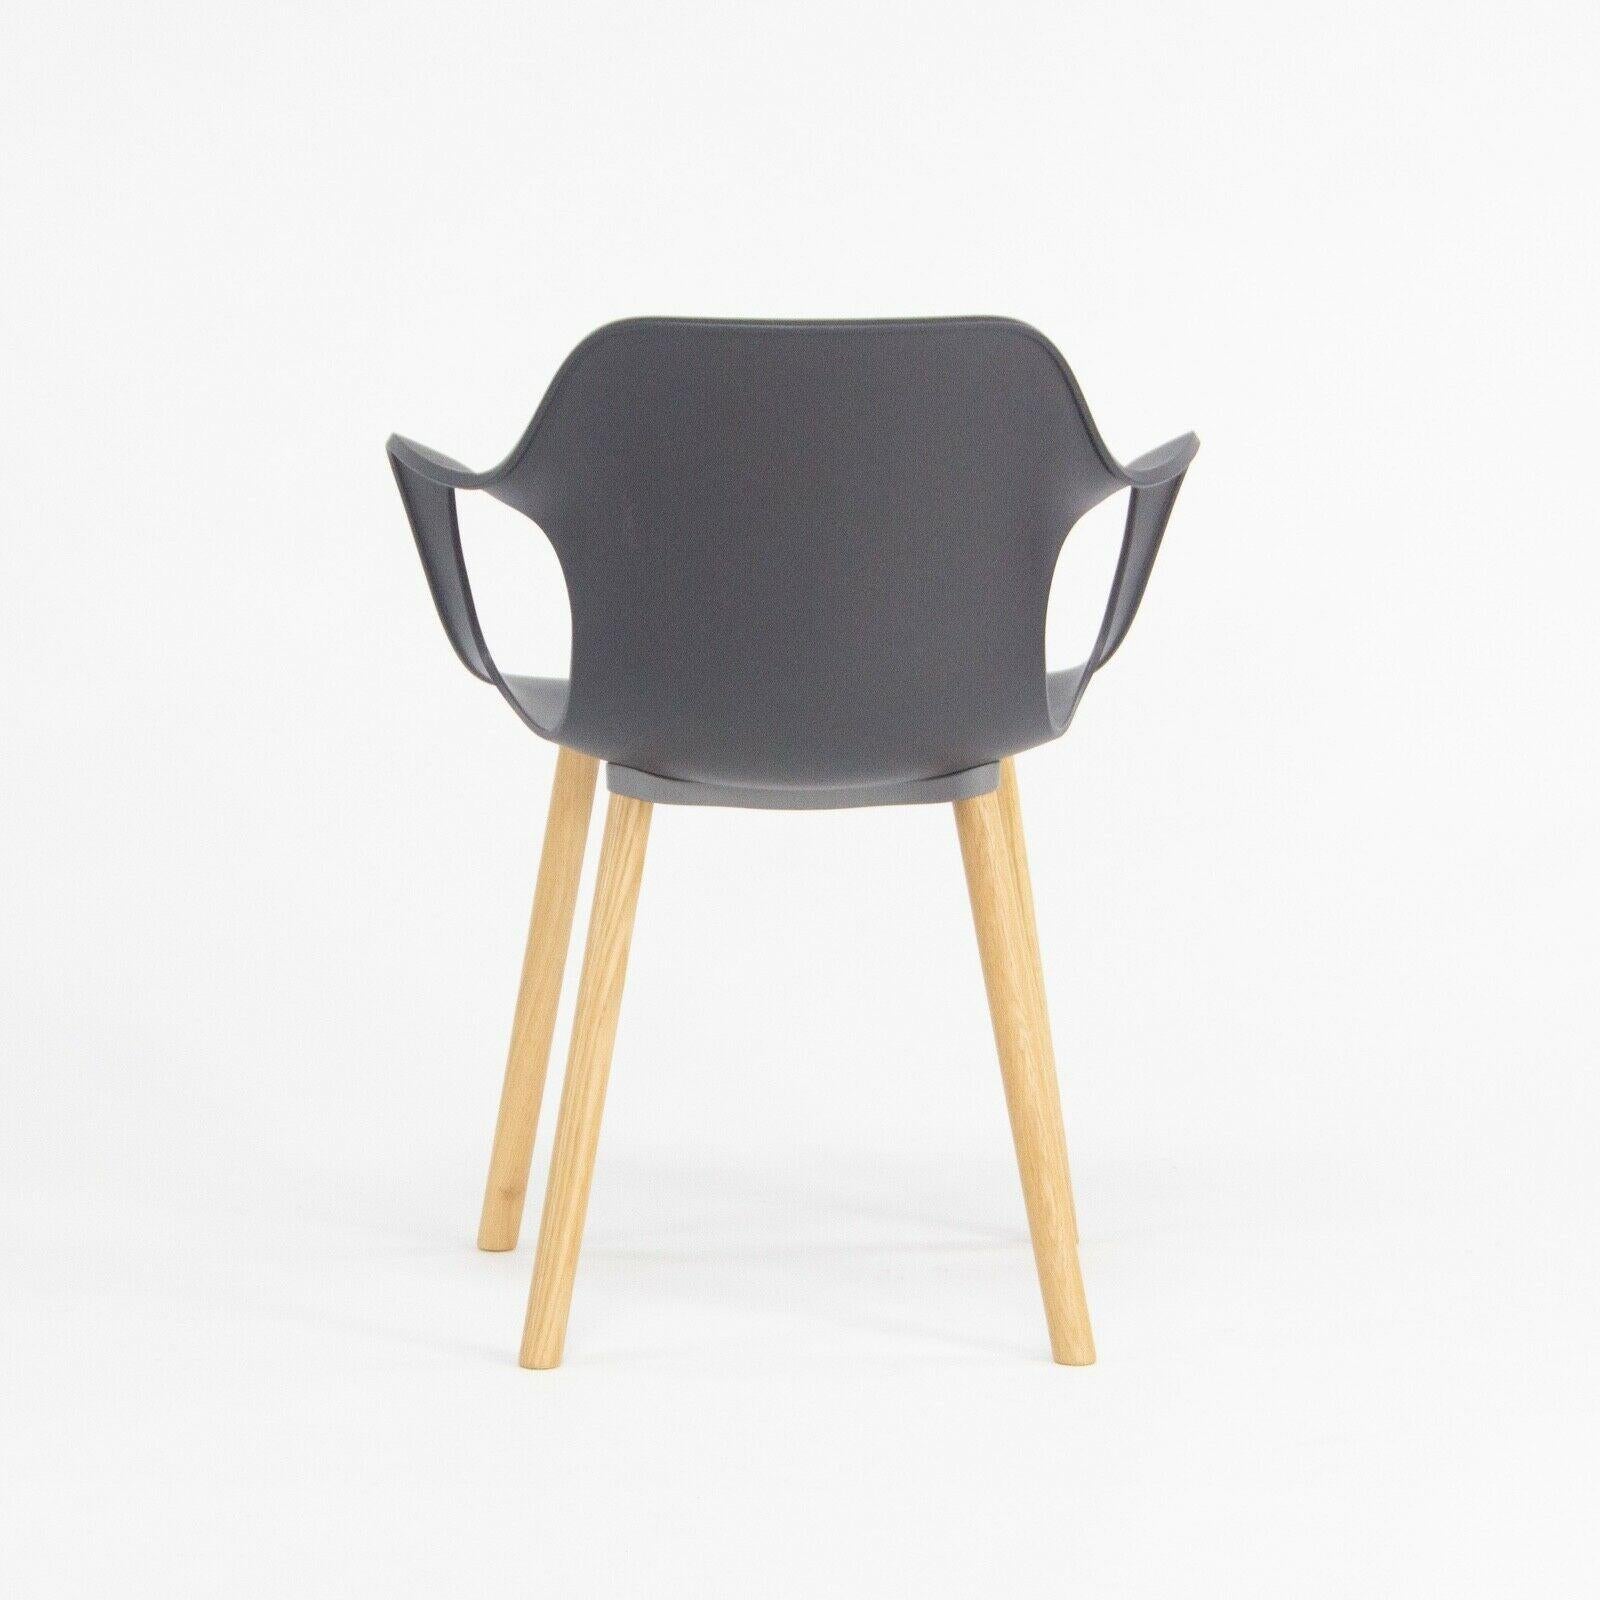 Modern 2018 Jasper Morrison for Vitra HAL Armchair with Black Seat and Oak Wood Legs For Sale